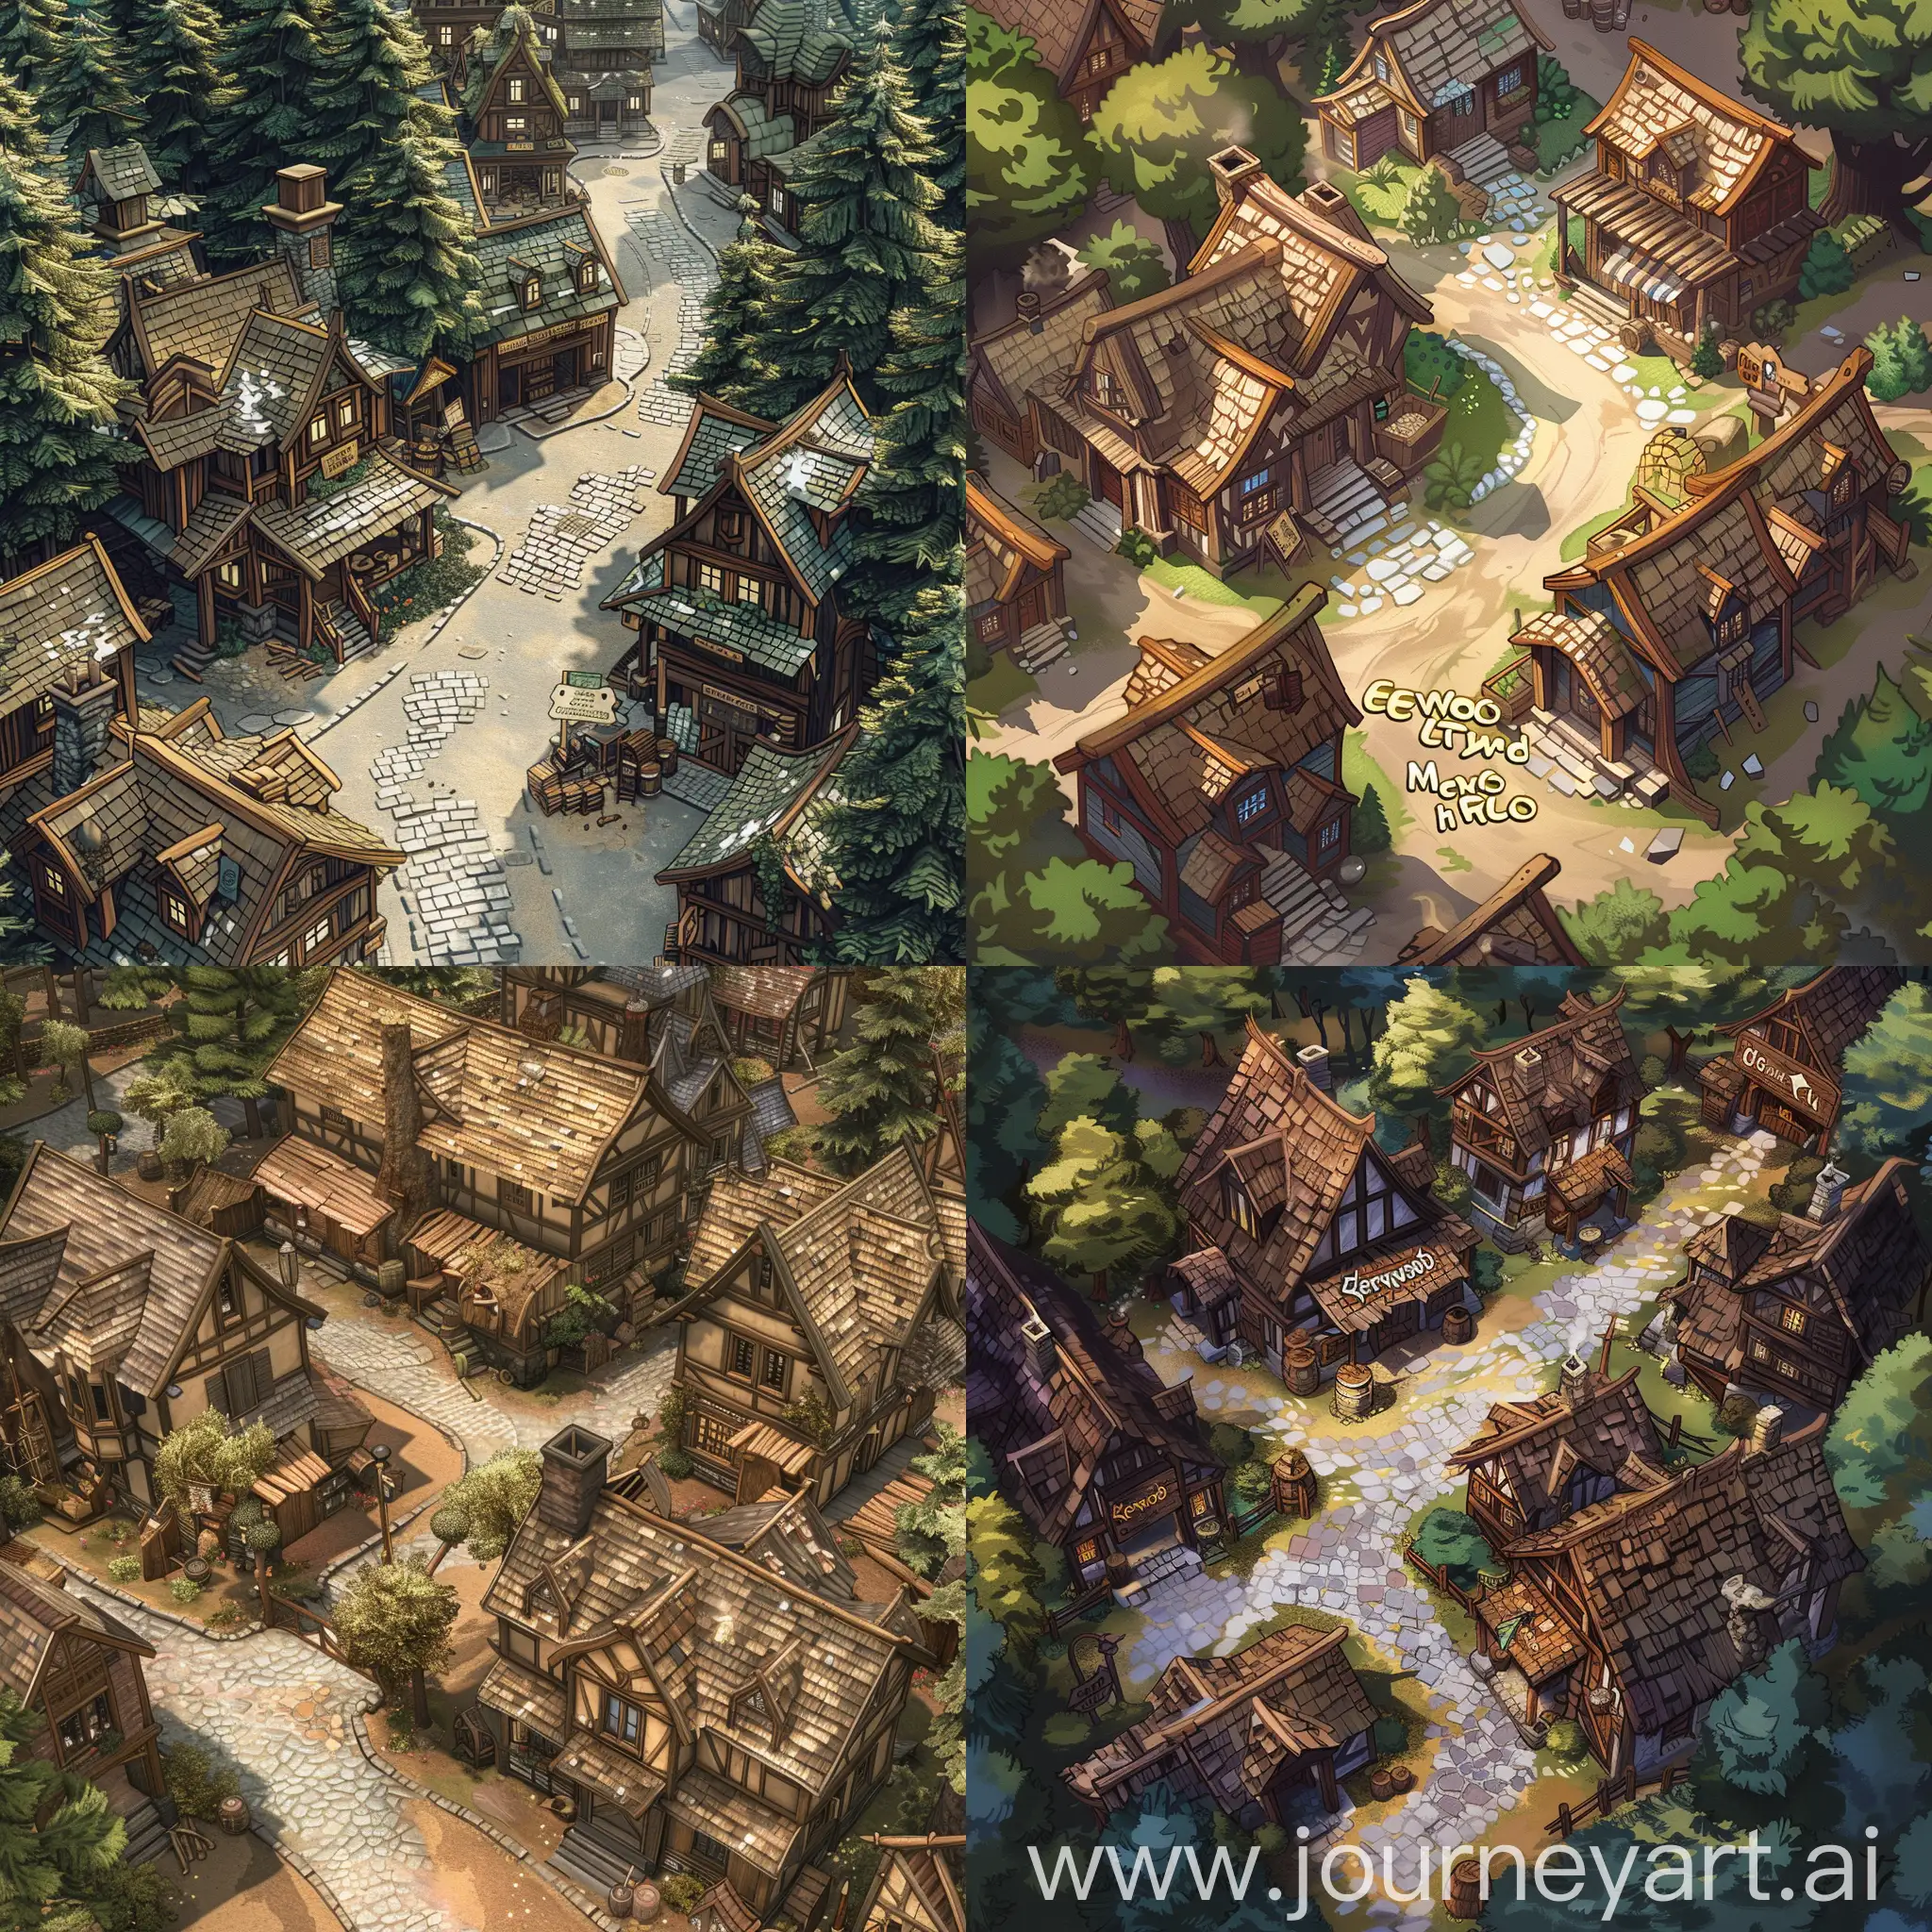 Centrally located is Everwood Town, a rustic settlement that serves as a hub of commerce and conversation. Its sturdy wooden structures and cobbled streets speak of a community that has adapted to the challenges posed by its proximity to Everwood Forest. Here, adventurers can trade goods, gather information, and equip themselves for the trials ahead.